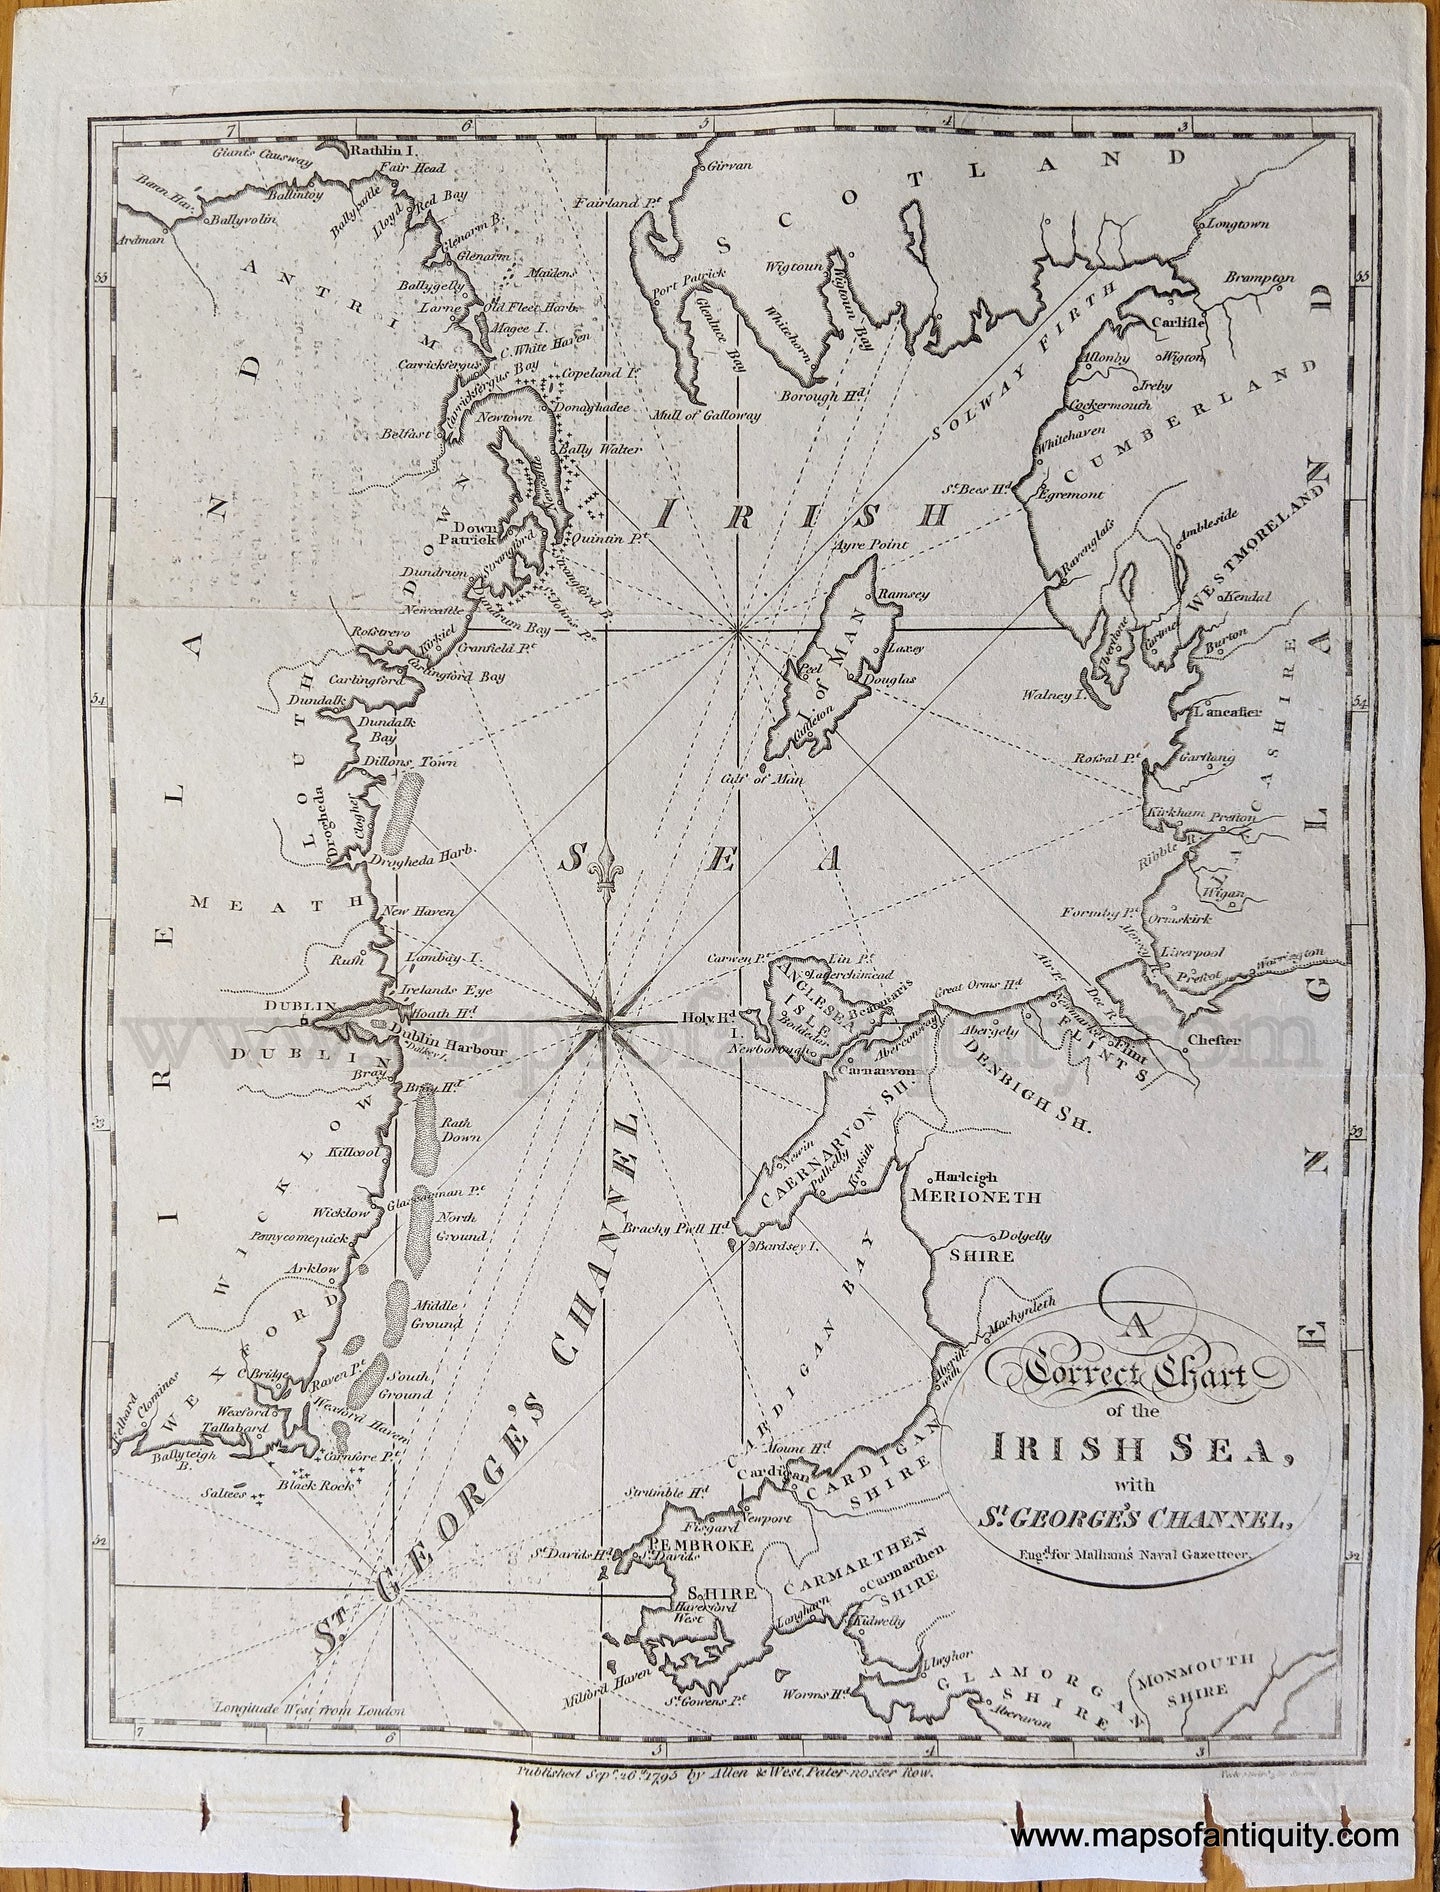 Genuine-Antique-Map-A-Correct-Chart-of-the-Irish-Sea-with-St-George's-Channel-Europe--1795-Malham's-Naval-Gazetteer-Maps-Of-Antiquity-1800s-19th-century